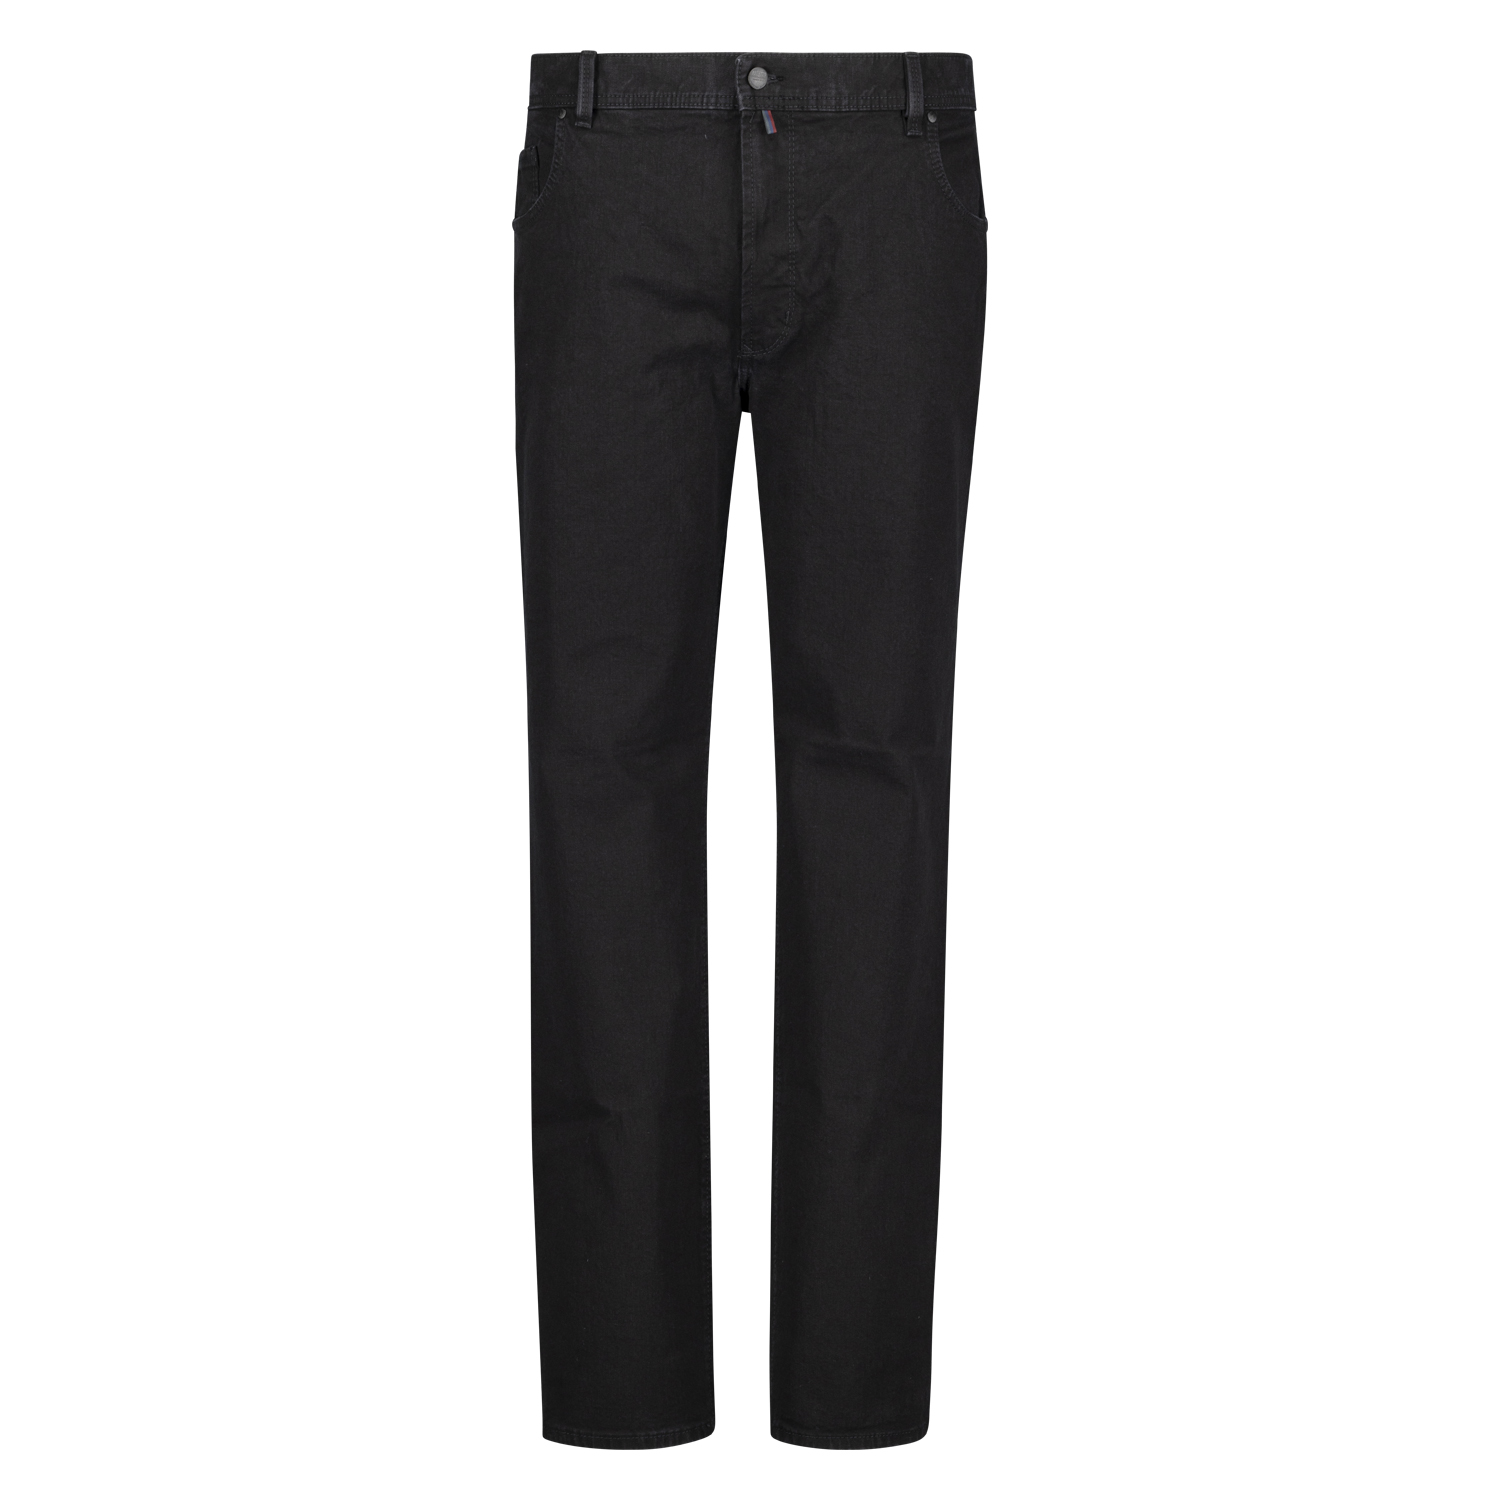 5-Pocket Jeans homme avec stretch "Peter" noir by Pioneer grandes tailles (Taille basse): 28 - 40